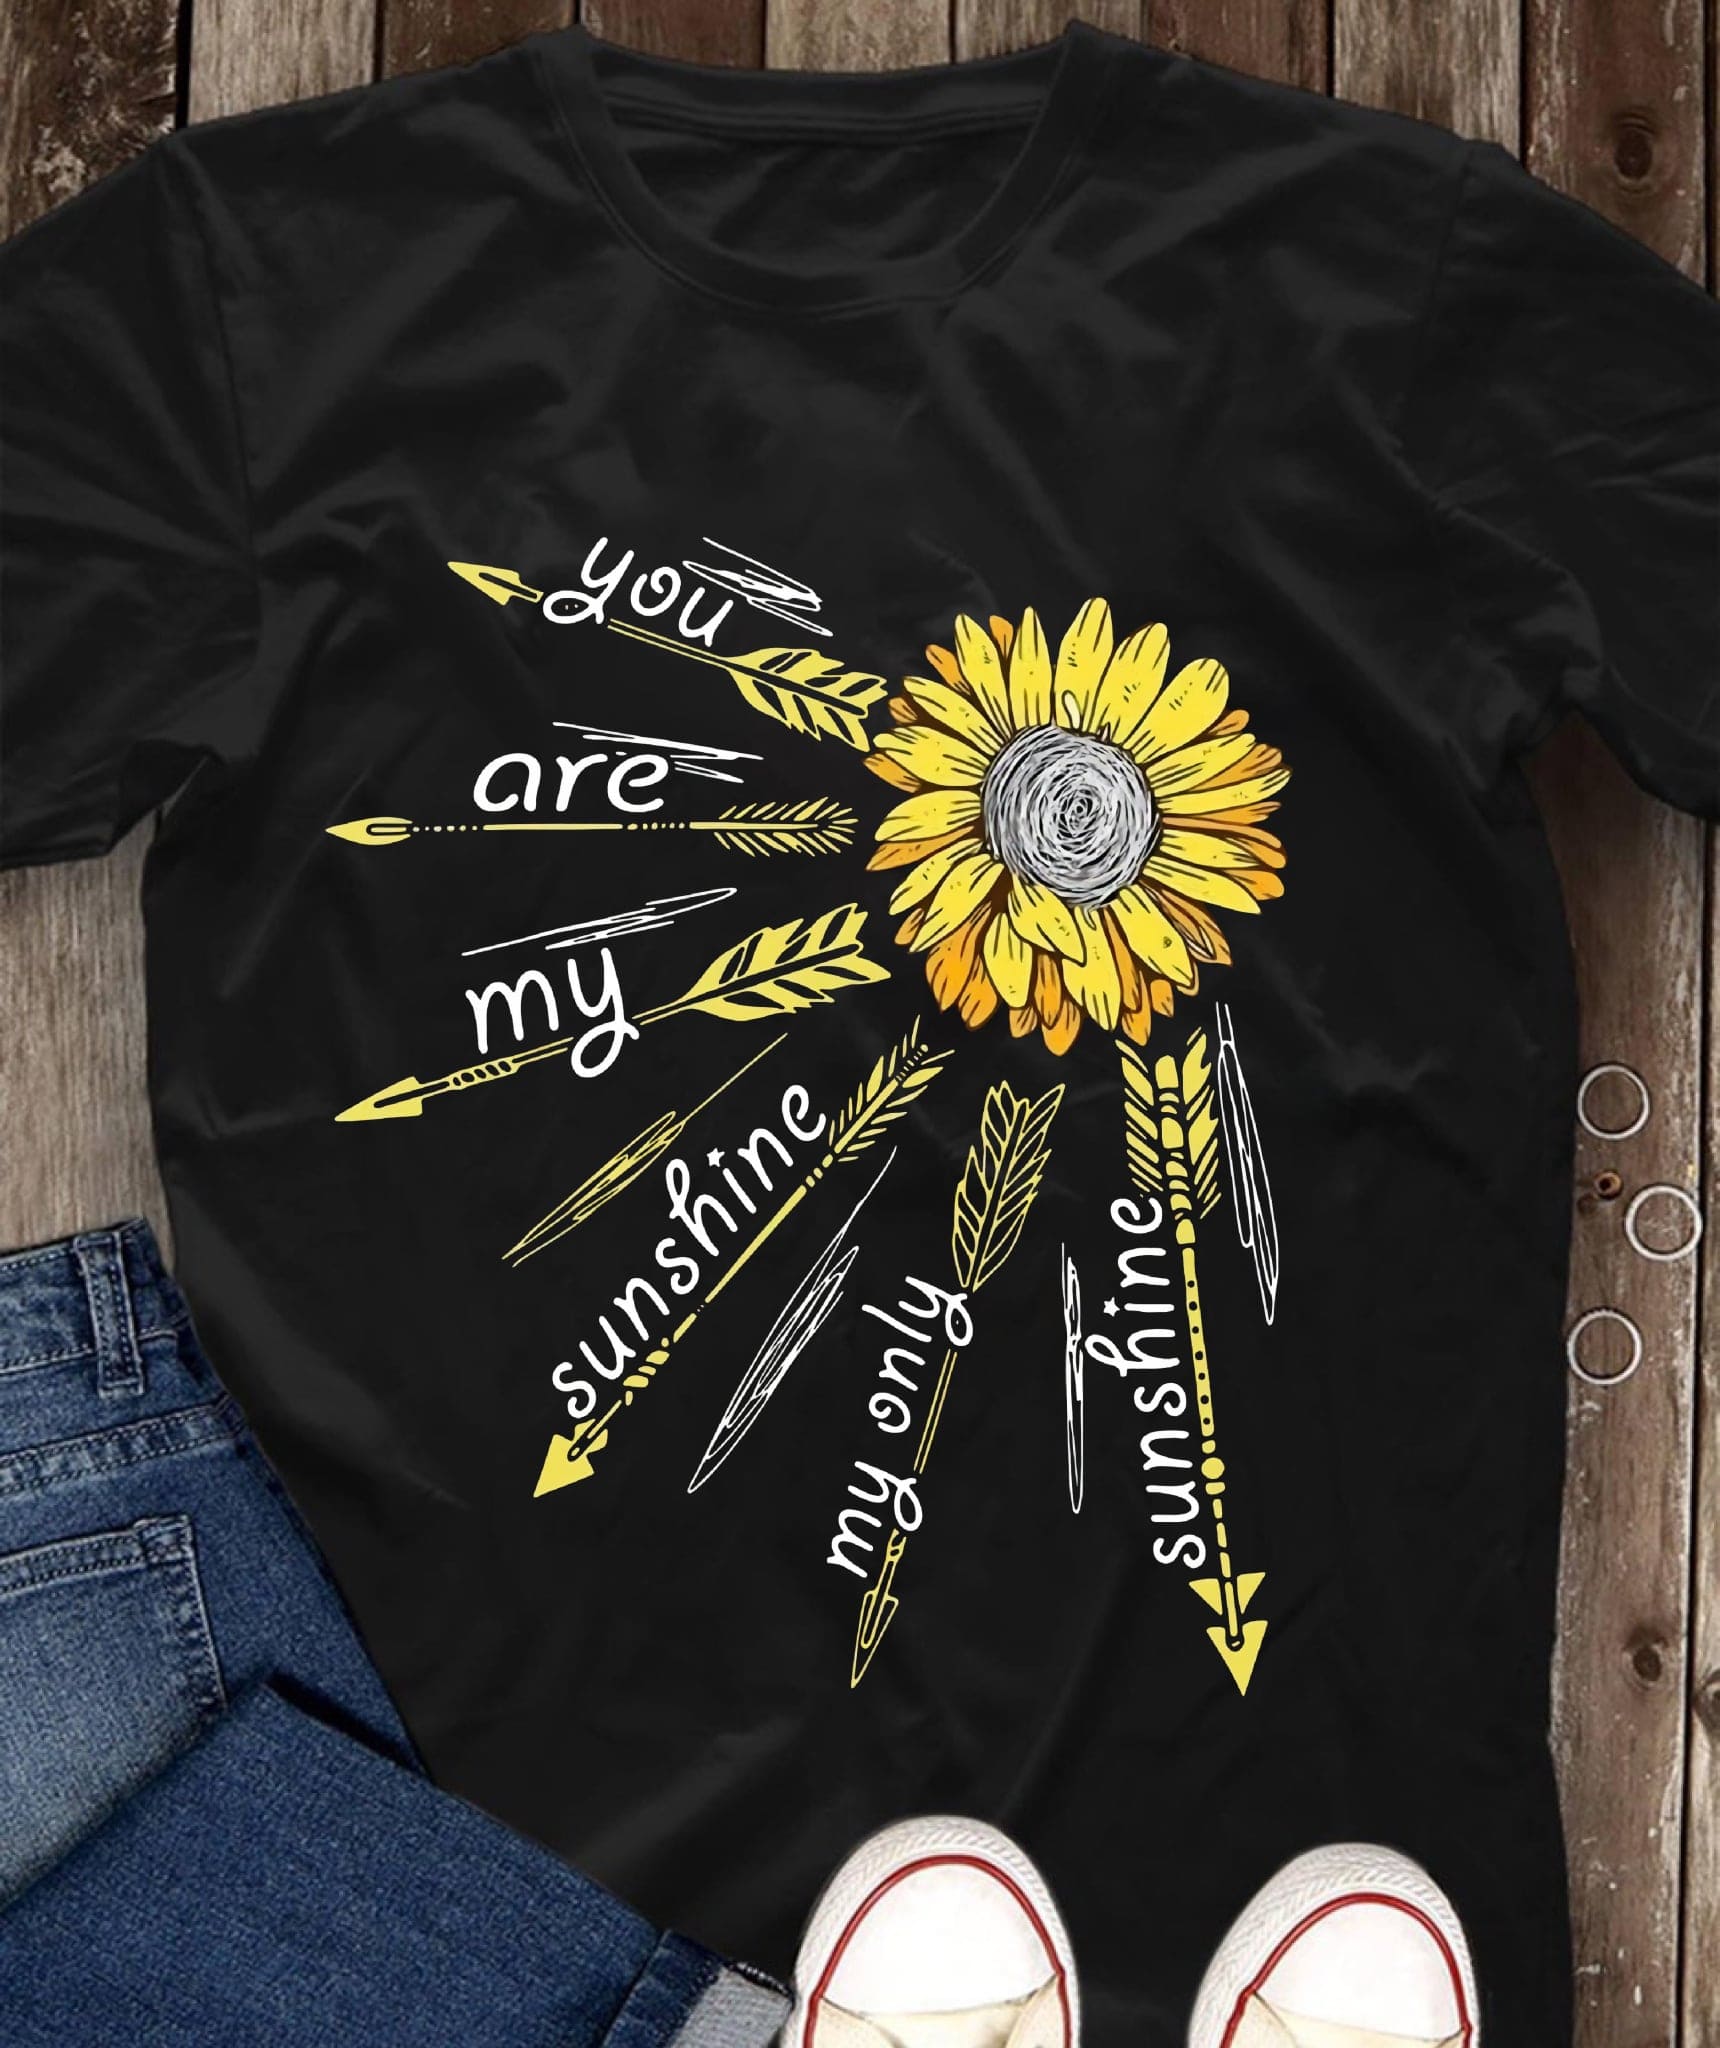 You are my sunshine, my only sunshine - Sunflower graphic T-shirt